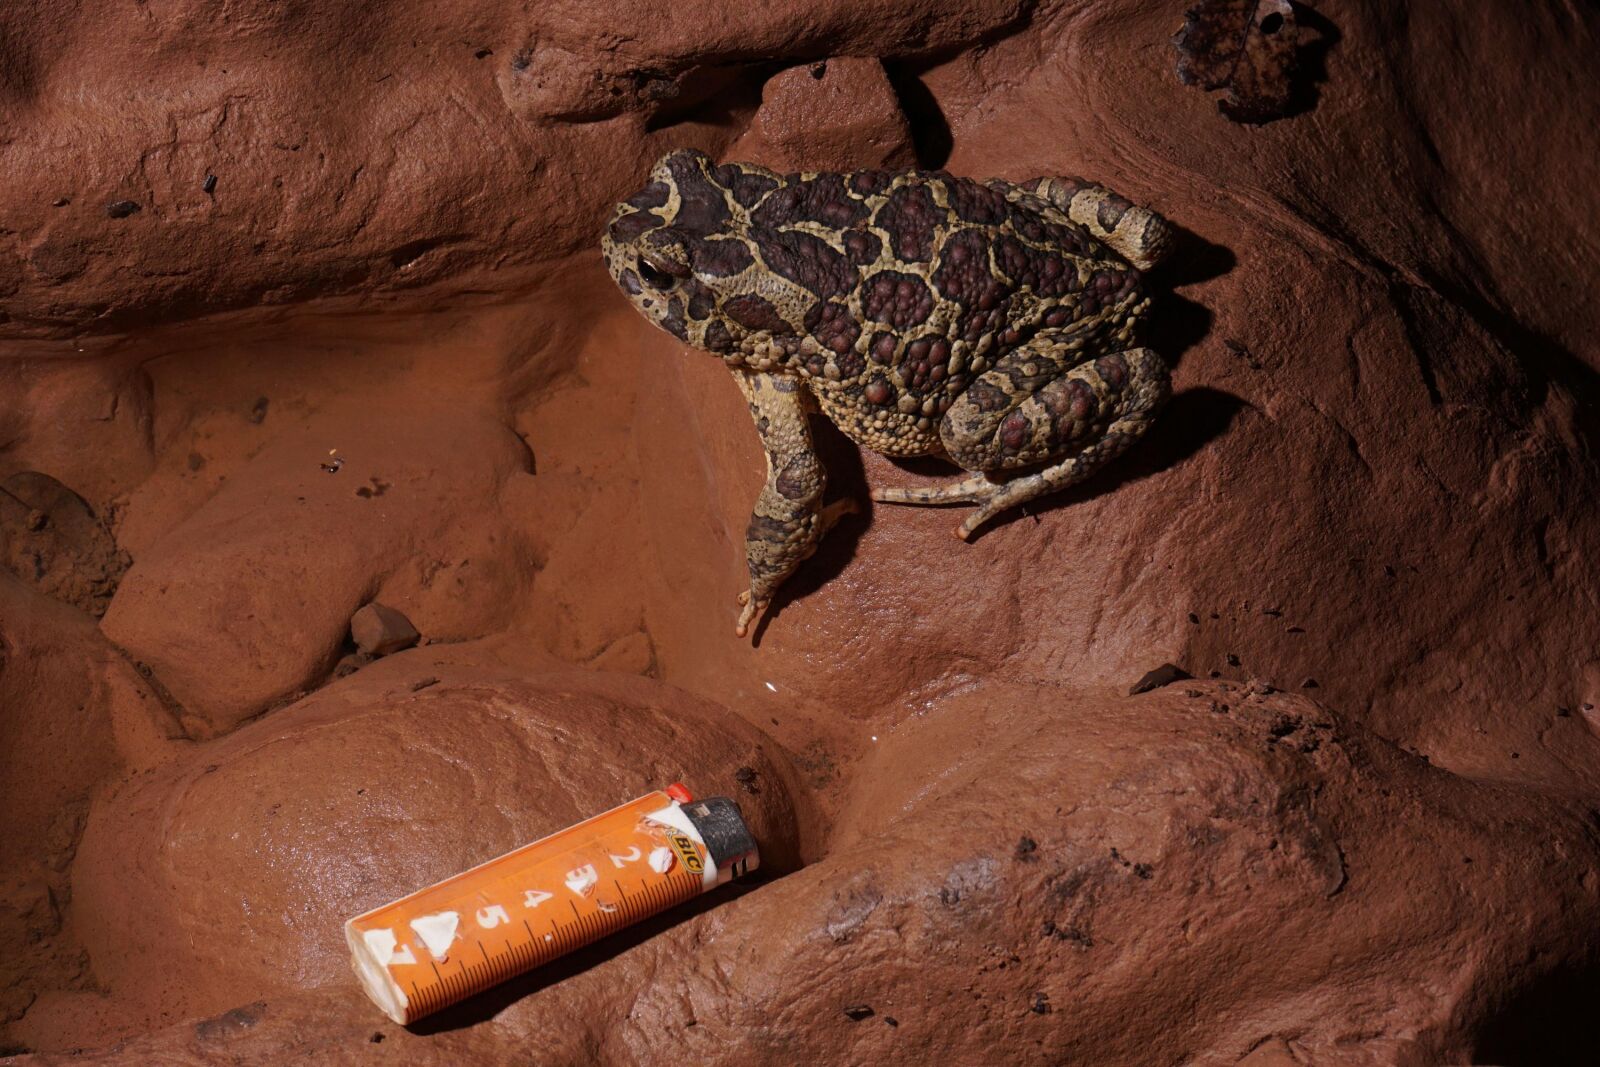 Sony a6000 sample photo. Frog, cave, morocco photography